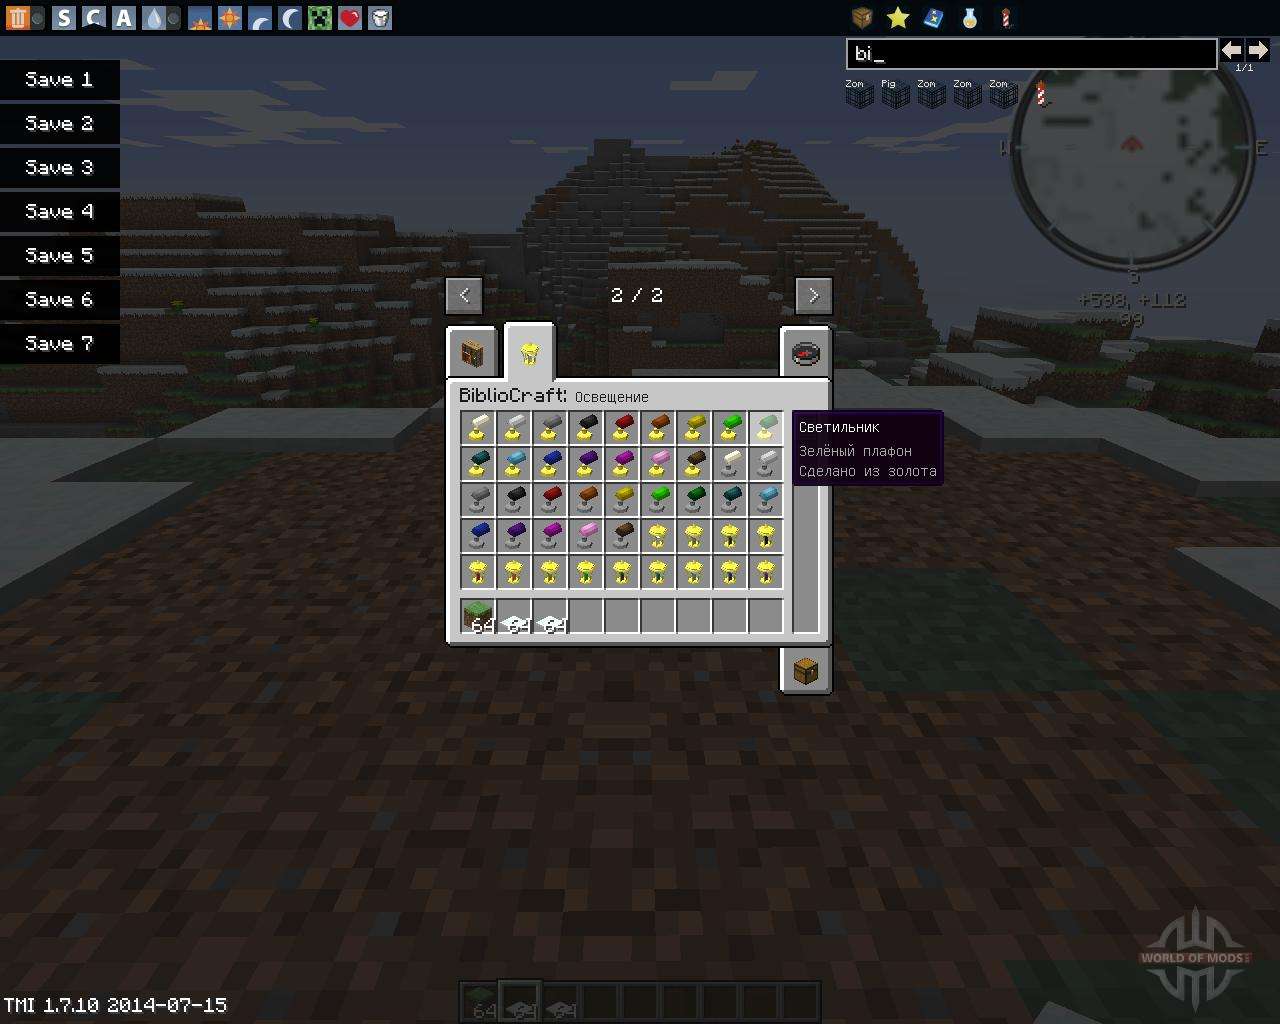 Bibliocraft Minecraft Mod: Exploring the Enhanced Crafting Experience in Version 1.12.2